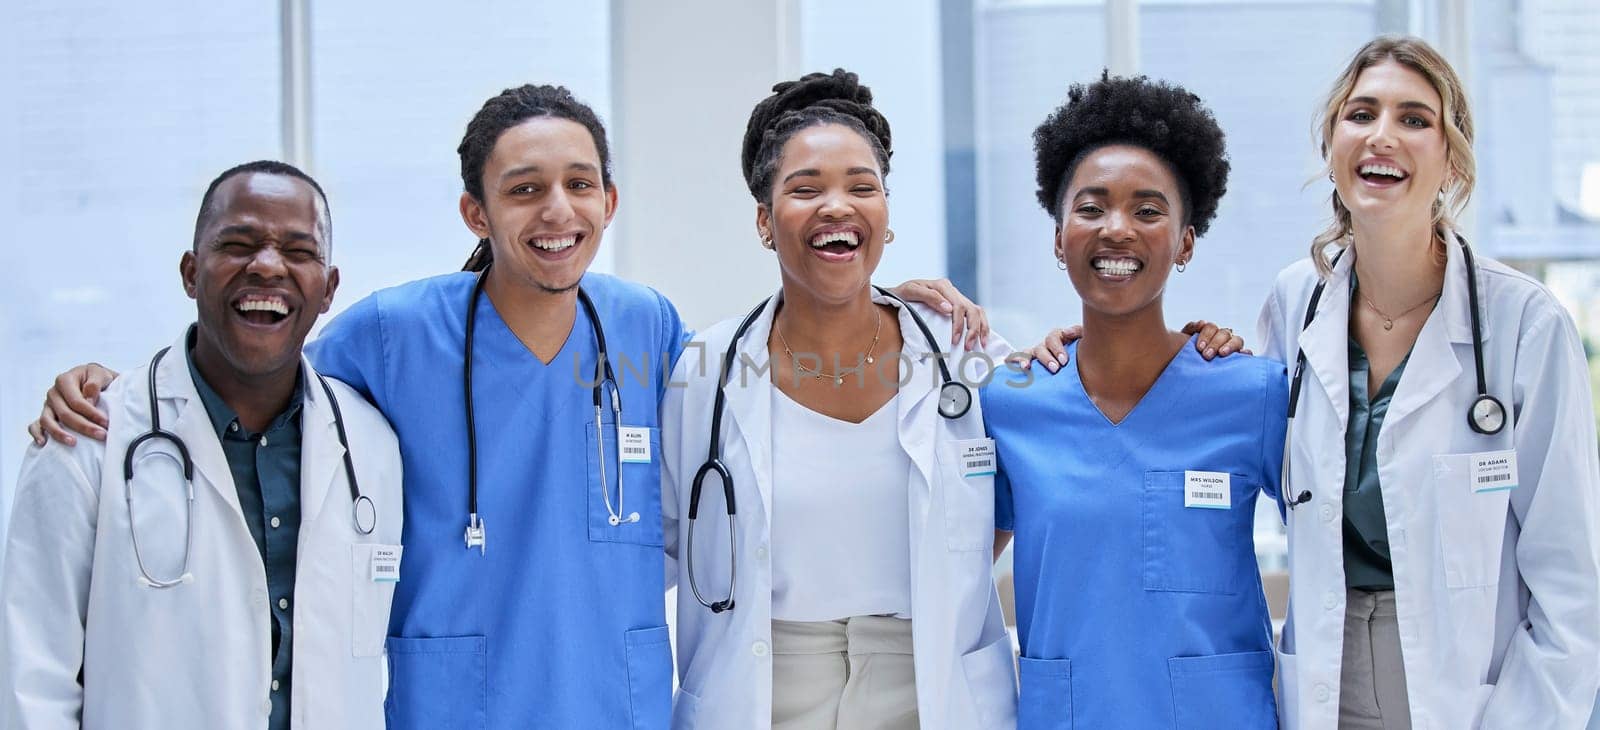 Group, happy doctors and healthcare portrait for hospital services, mission and diversity values. Support, love and laughing nurses, medical professional employees or face of USA clinic staff success.